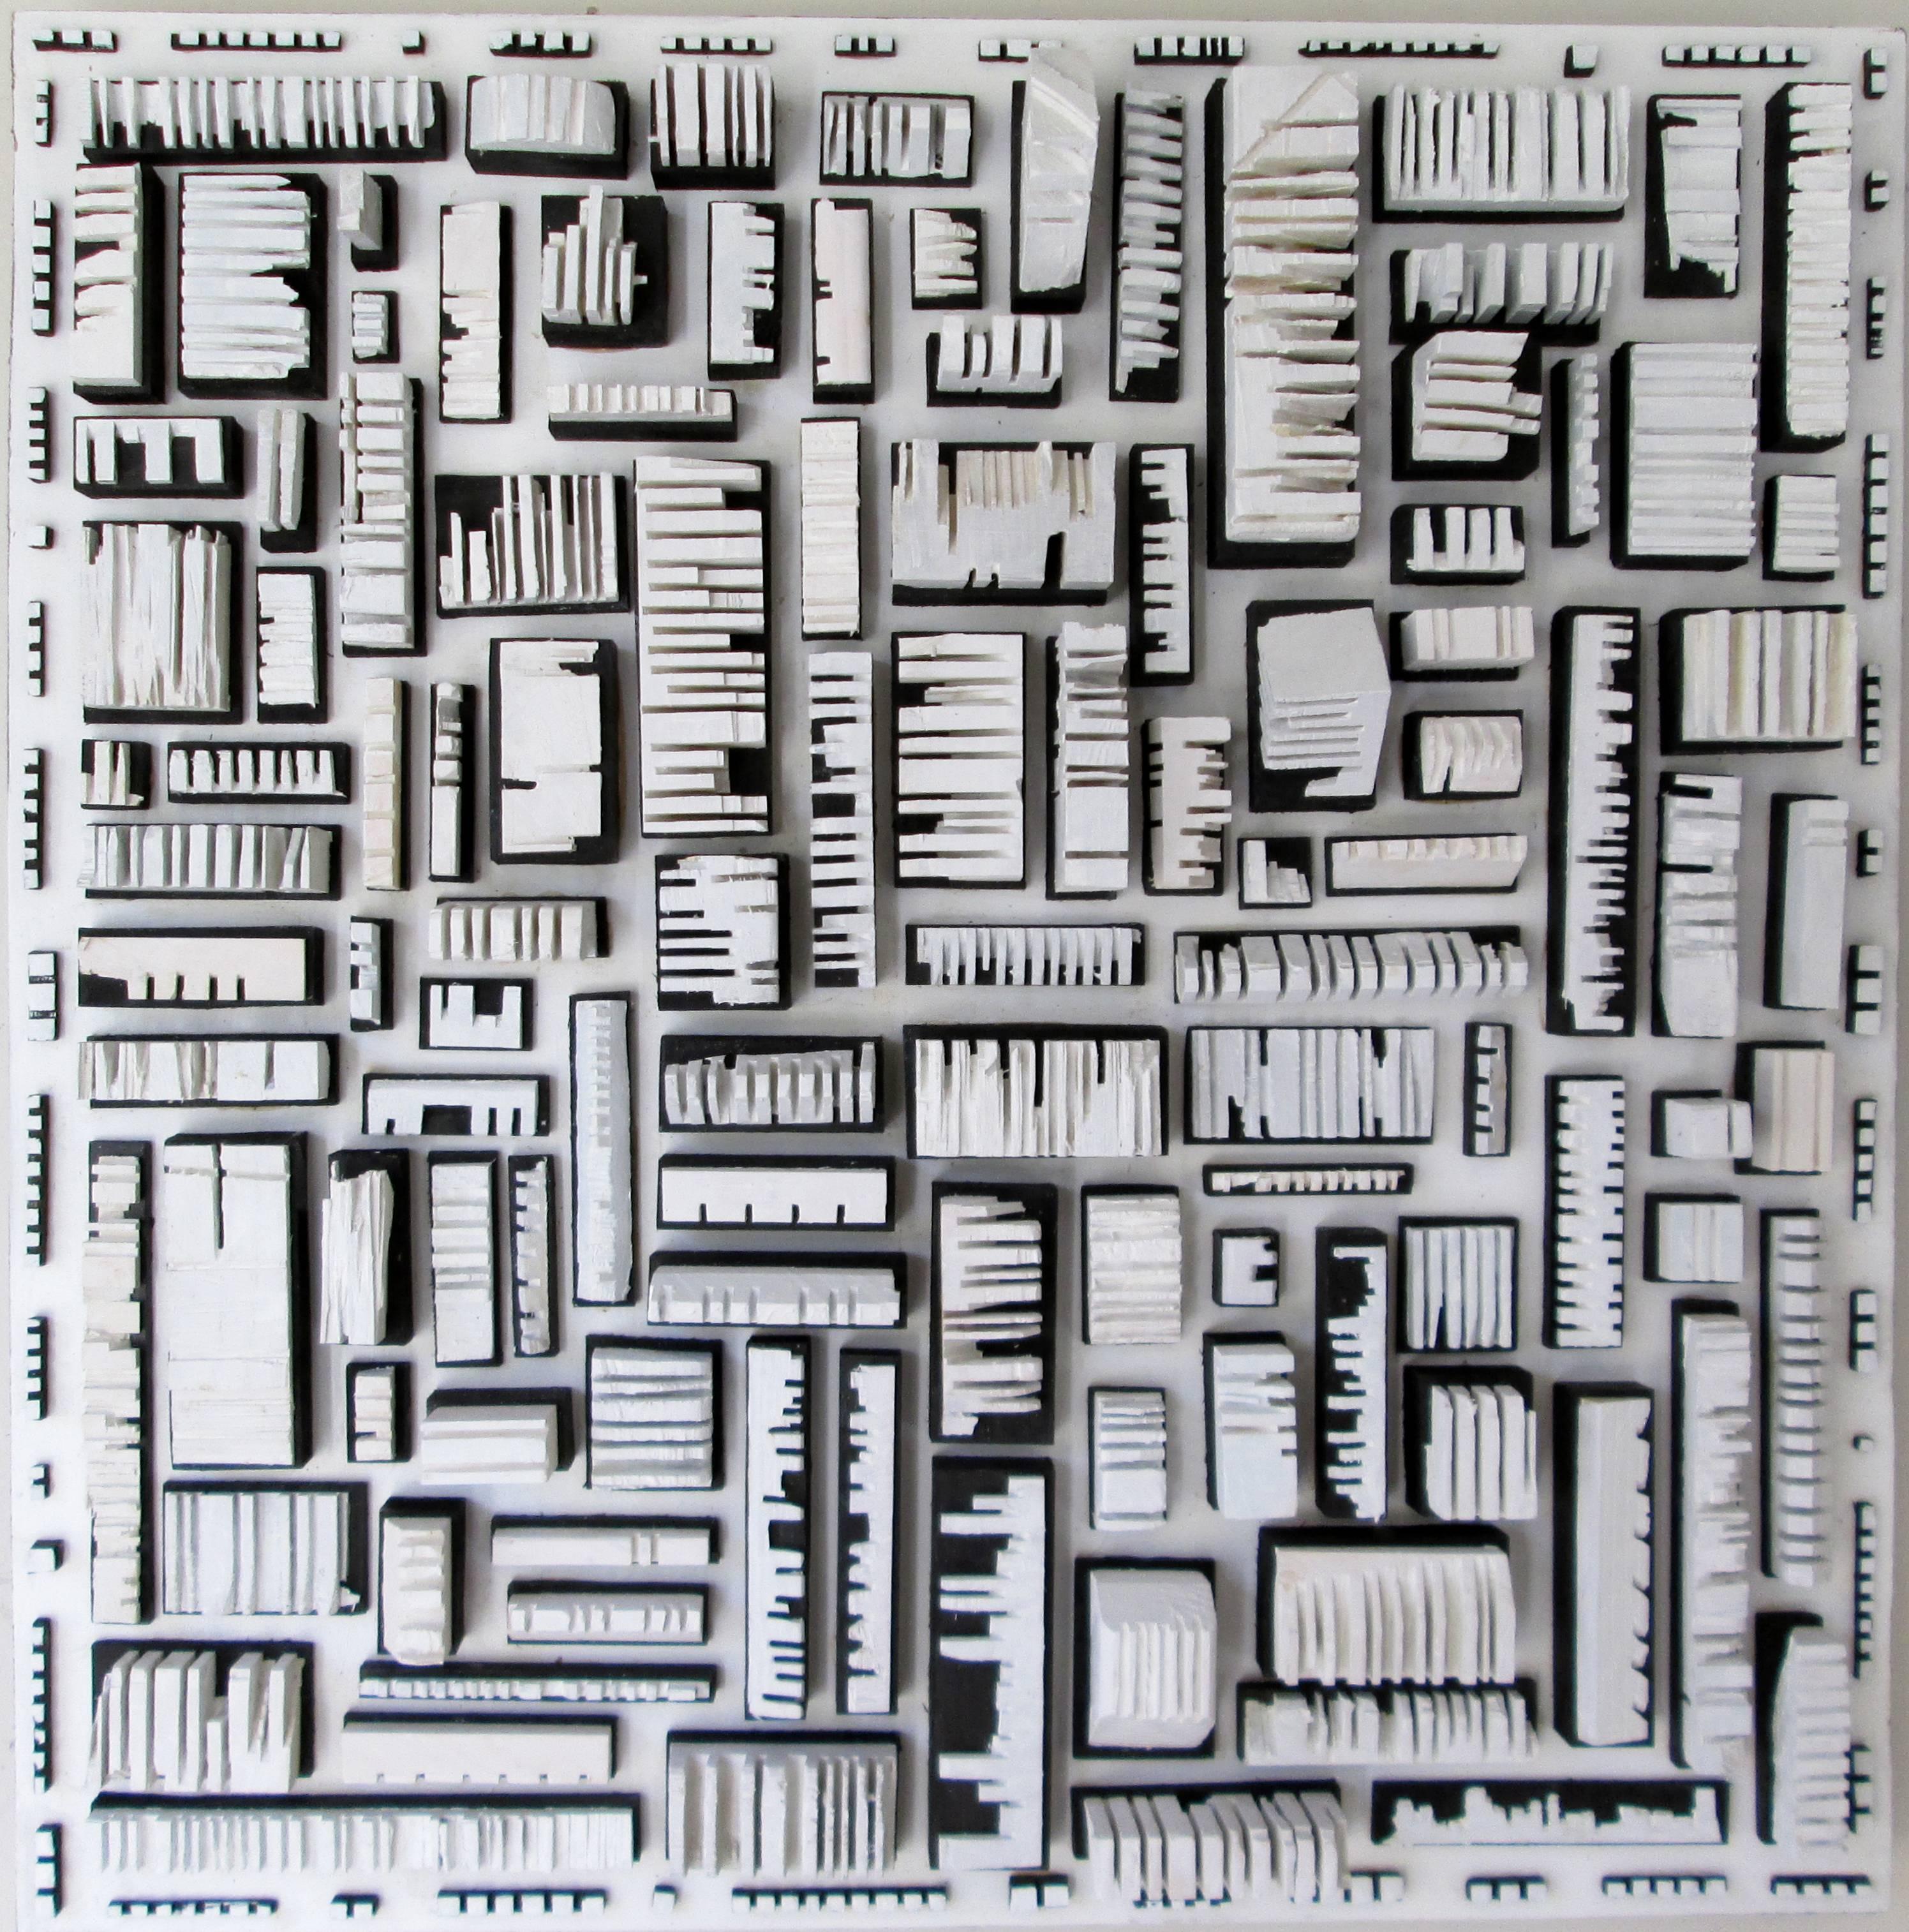 Stephen Walling Abstract Sculpture - Bits and Pieces (Abstract Aerial View of Urban Landscape in Black and White)